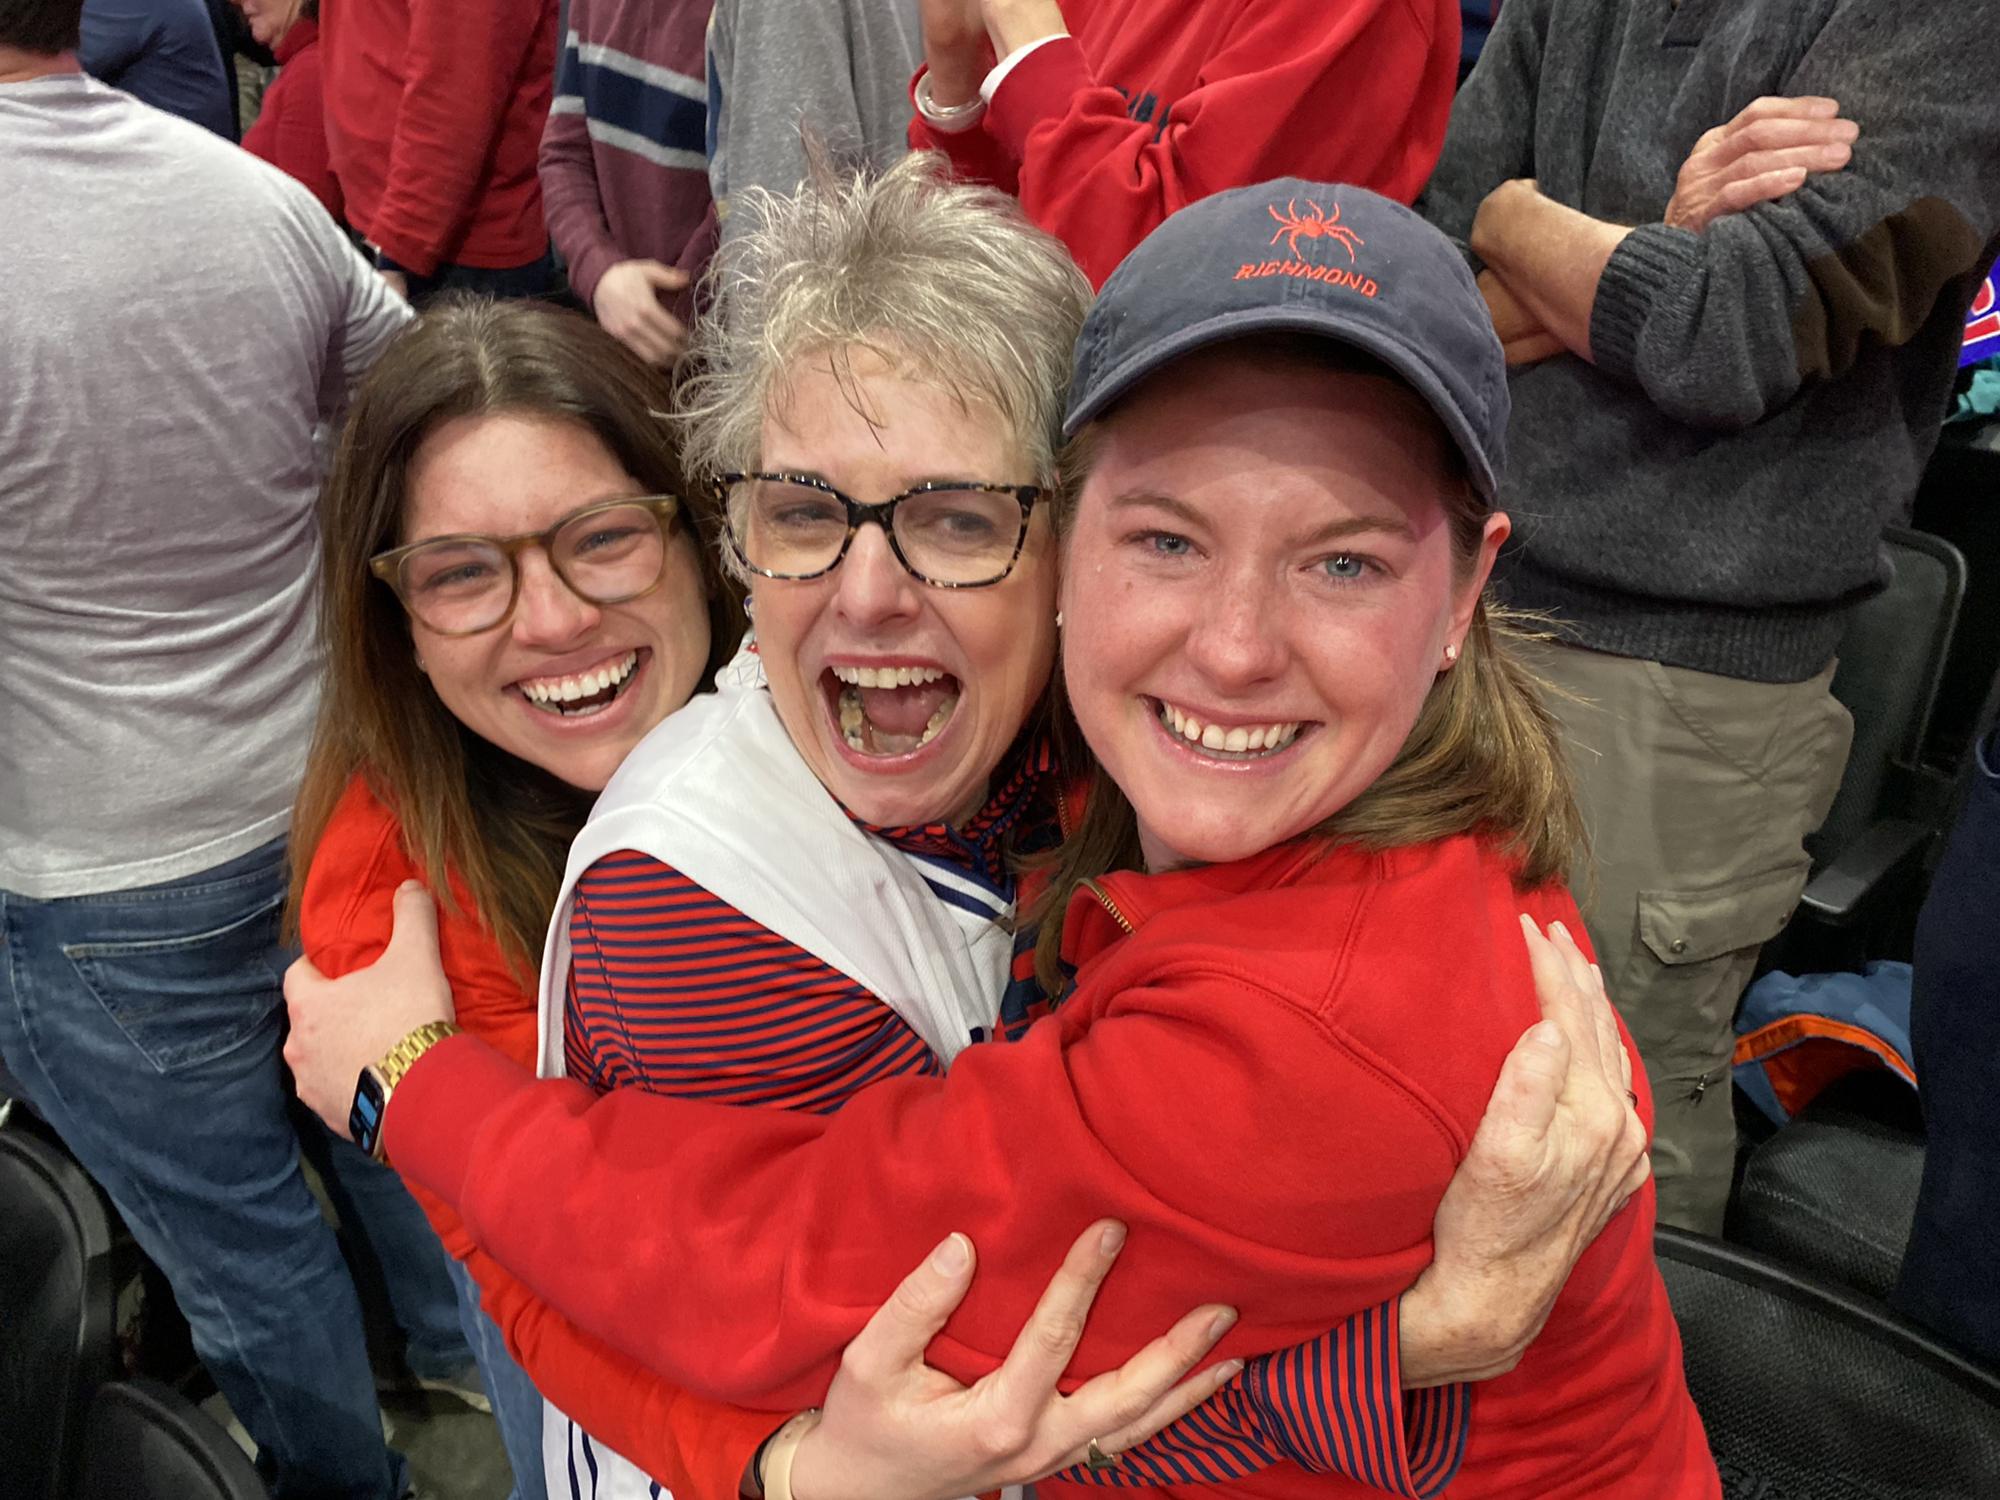 Amelia, sister Erica, and Mom Allison overwhelmed at Richmond Men's Basketball A-10 Championship.  March 2022.